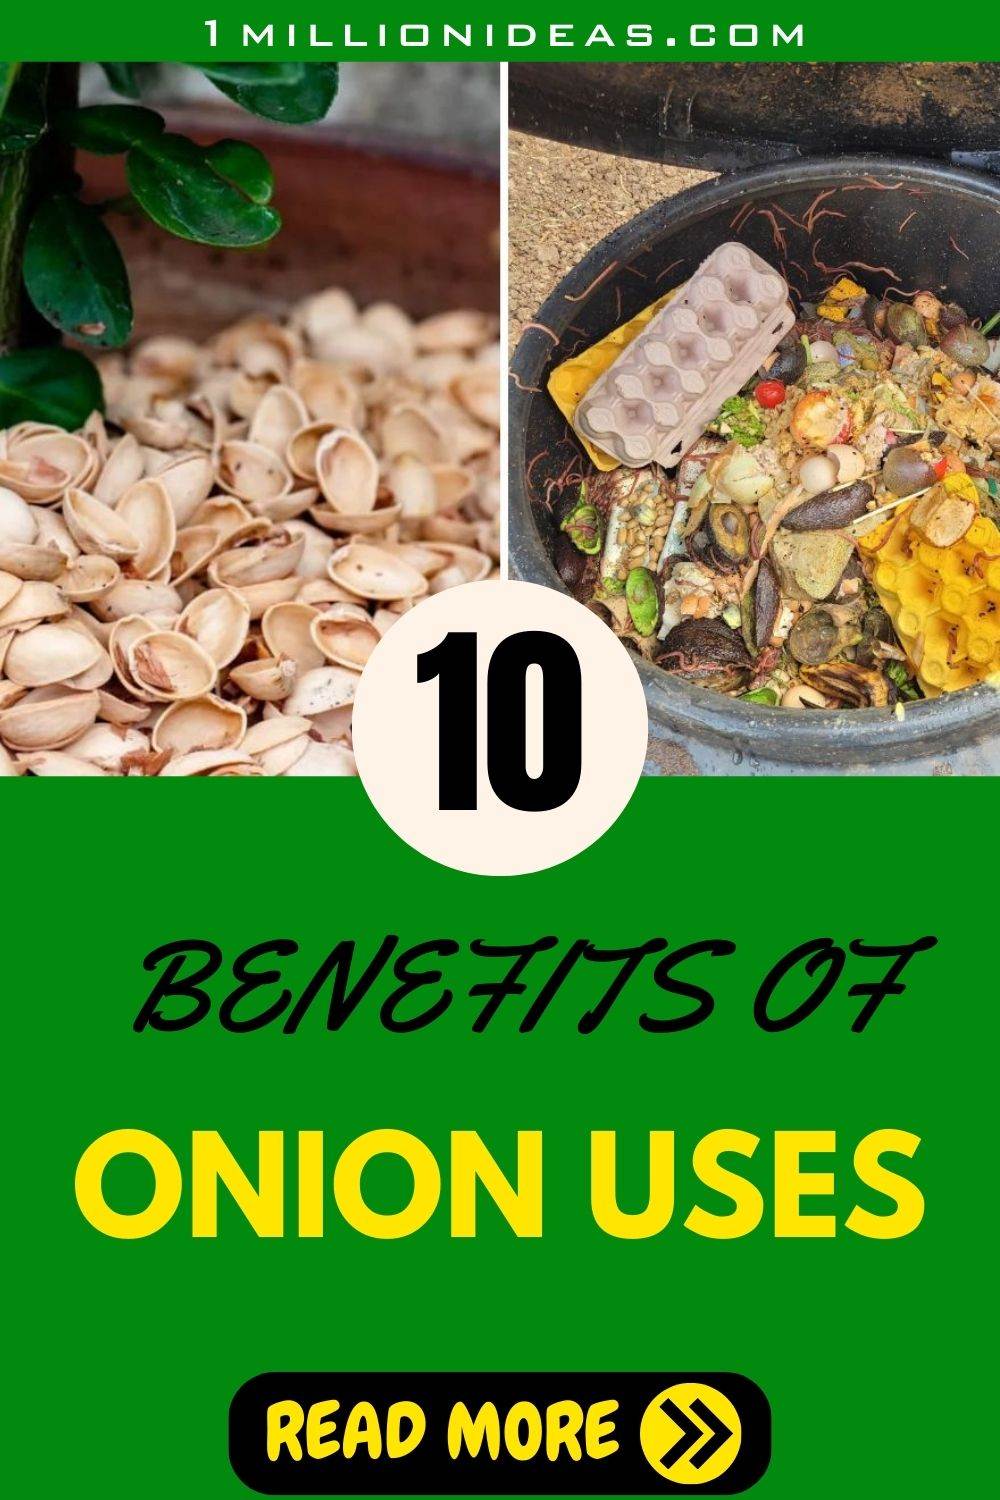 10 Onion Skin Uses That Will Make You Think Twice Before Throwing Them Away - 41